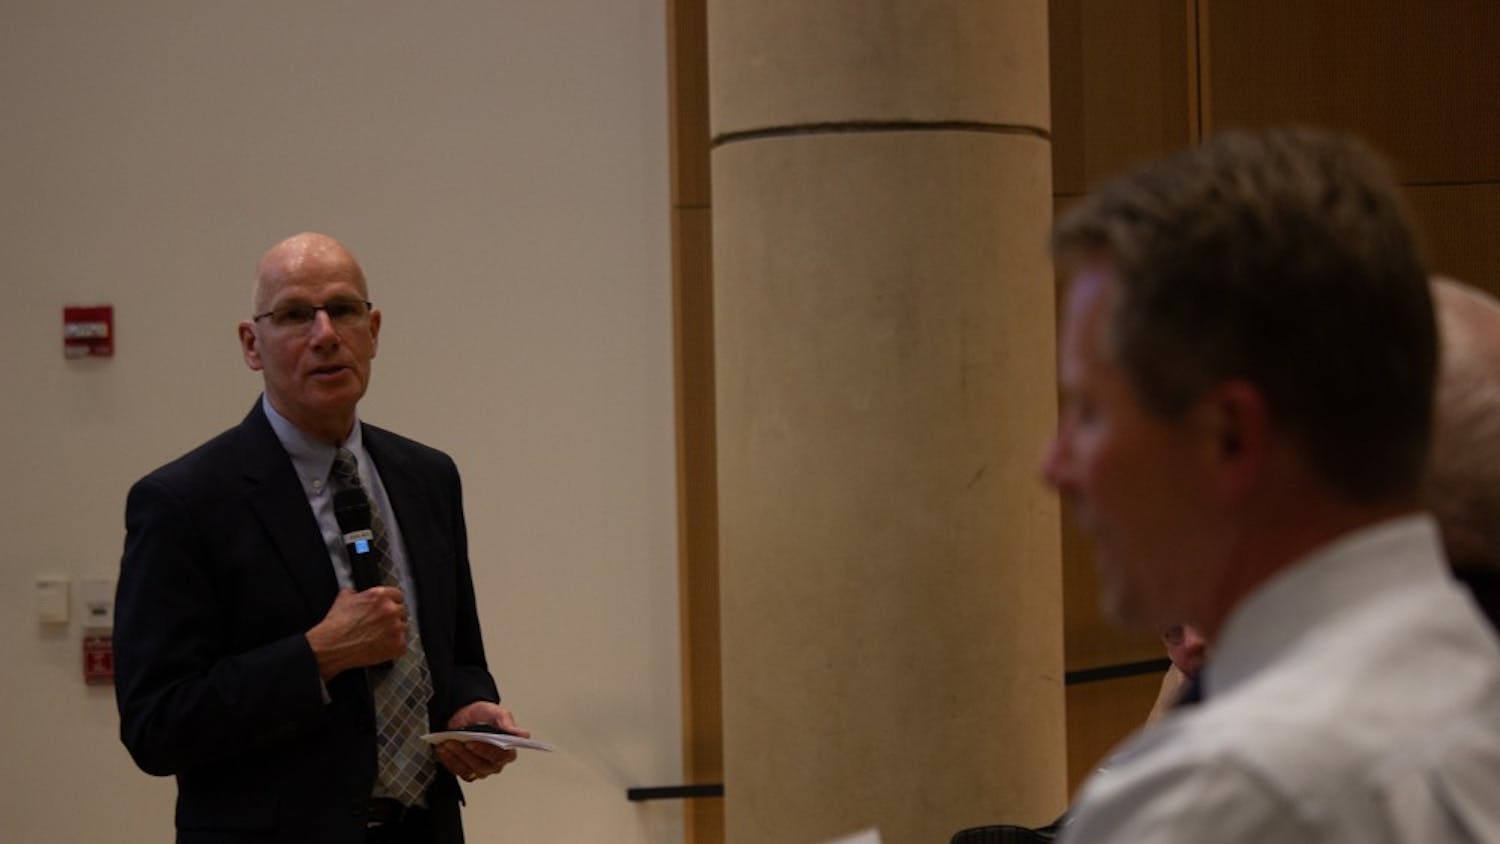 &nbsp;Executive Vice Chancellor and Provost Robert Blouin discussed digital education at UNC at a previous Faculty Executive Committee meeting in March 2019.&nbsp;